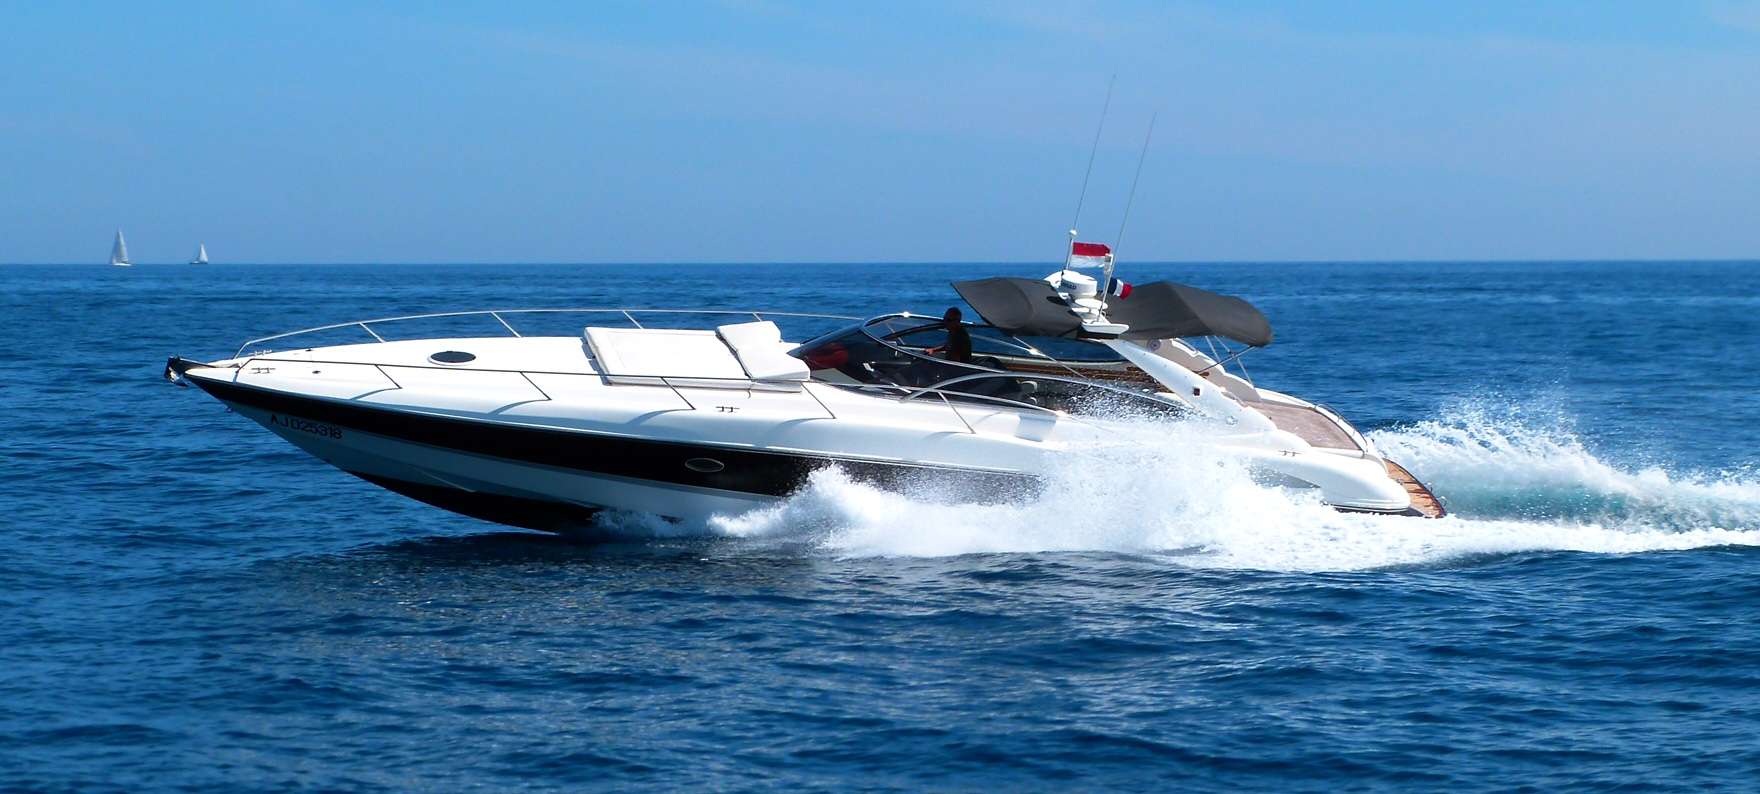 Sunseeker 48 - Yacht Charter Cannes & Boat hire in France French Riviera Cannes Vieux port de Vallauris 2